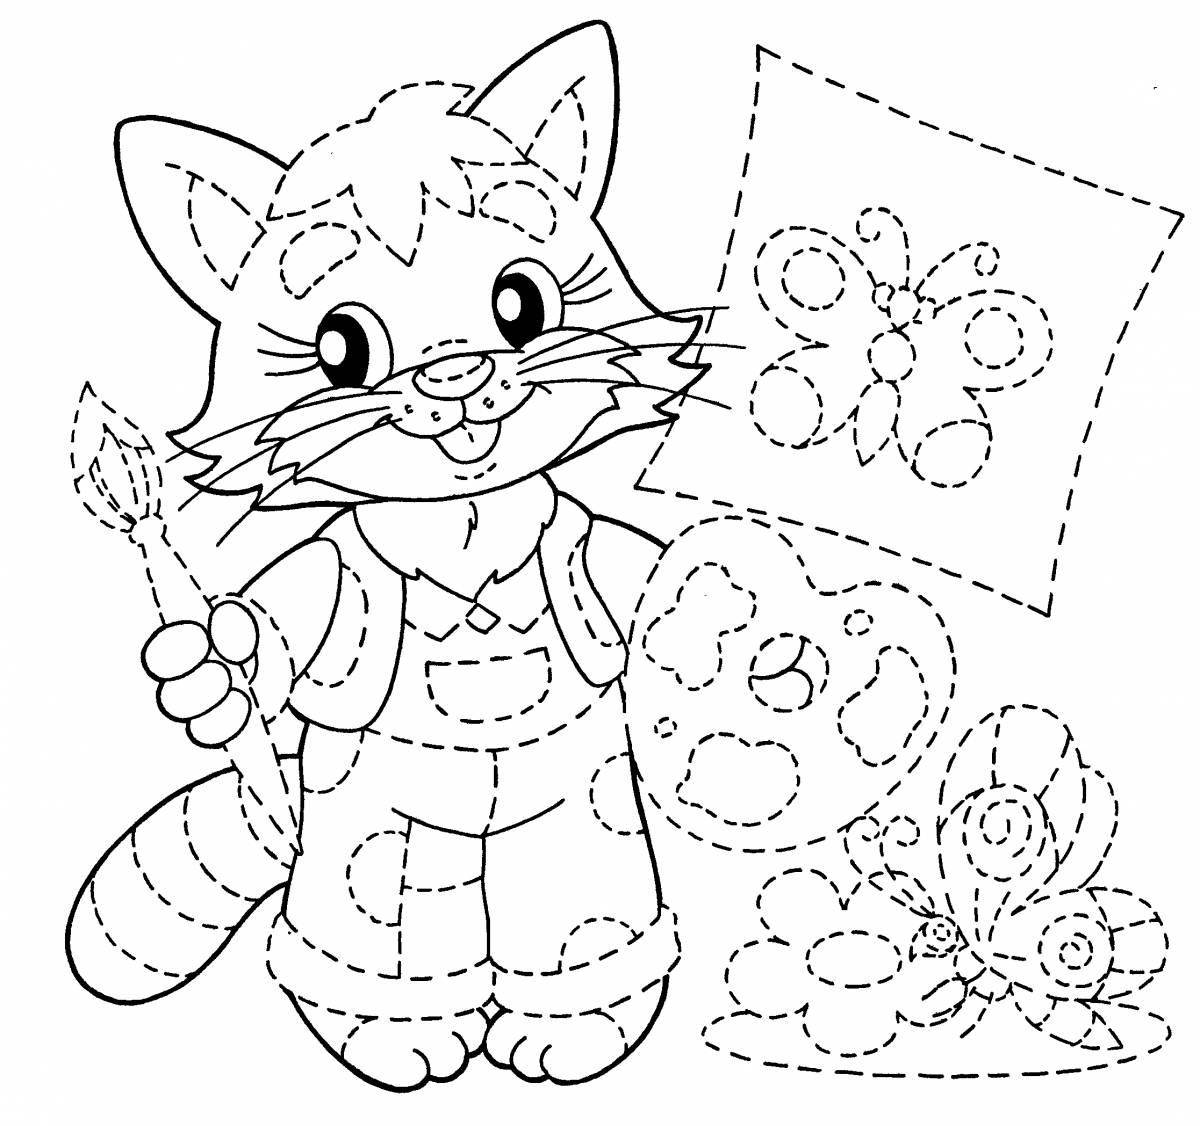 Coloring book for children 6-7 years old